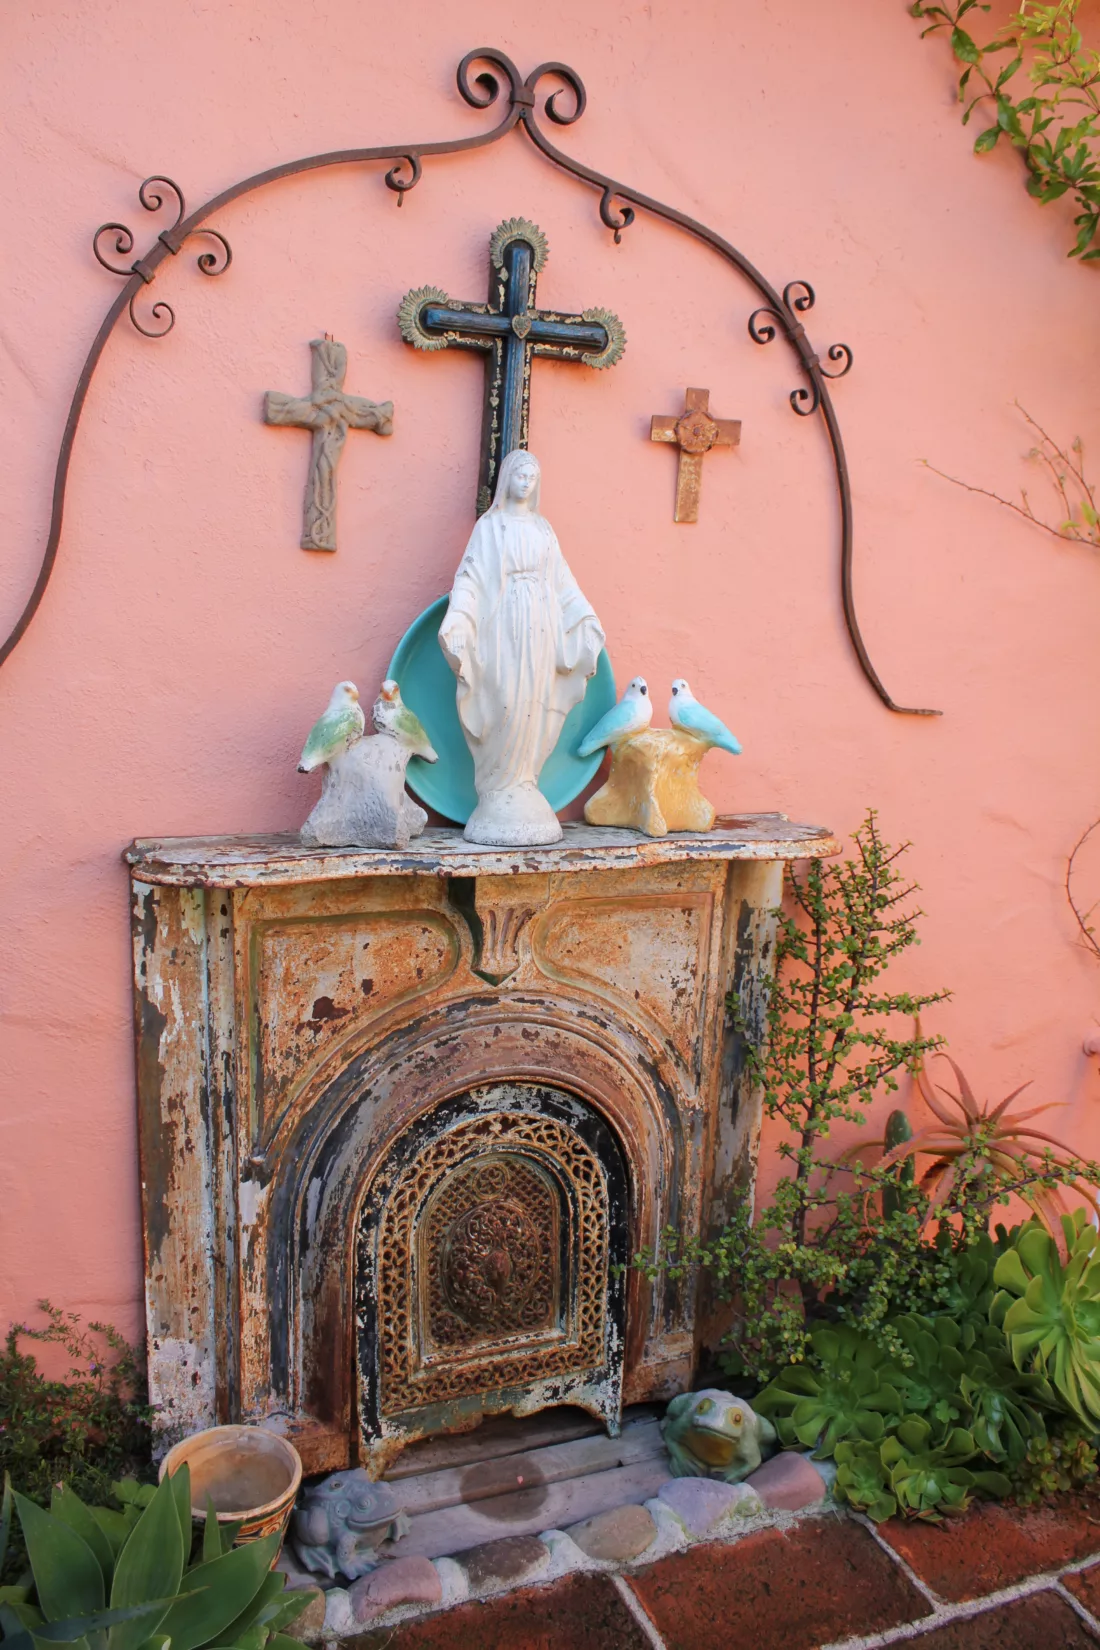 family alter in mexican style garden